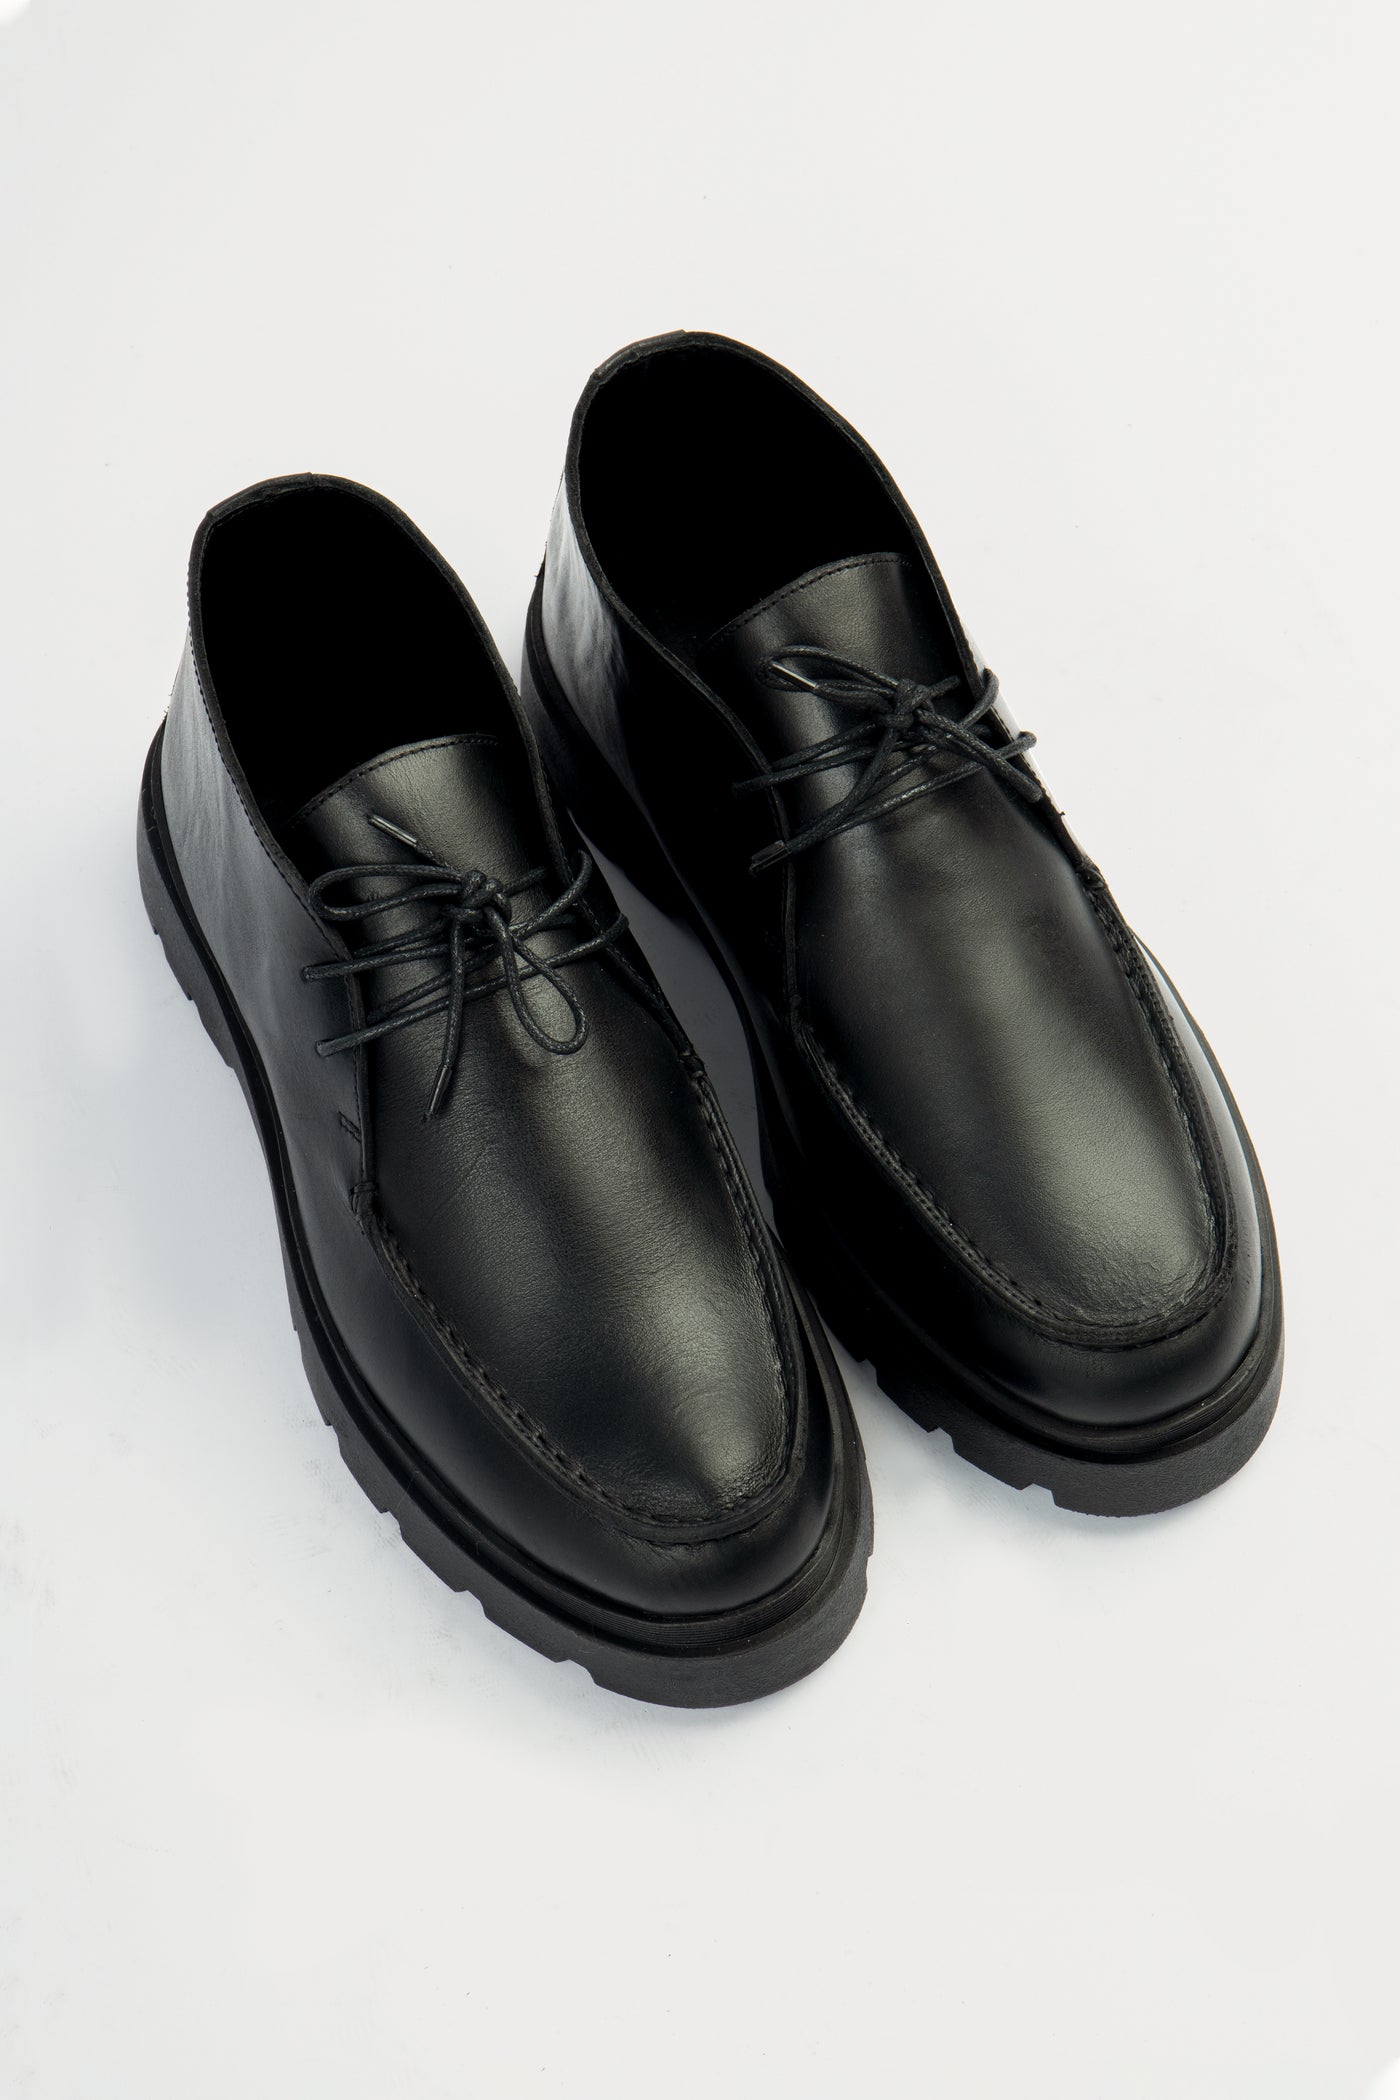 Black Leather Plain Half-boot with laces